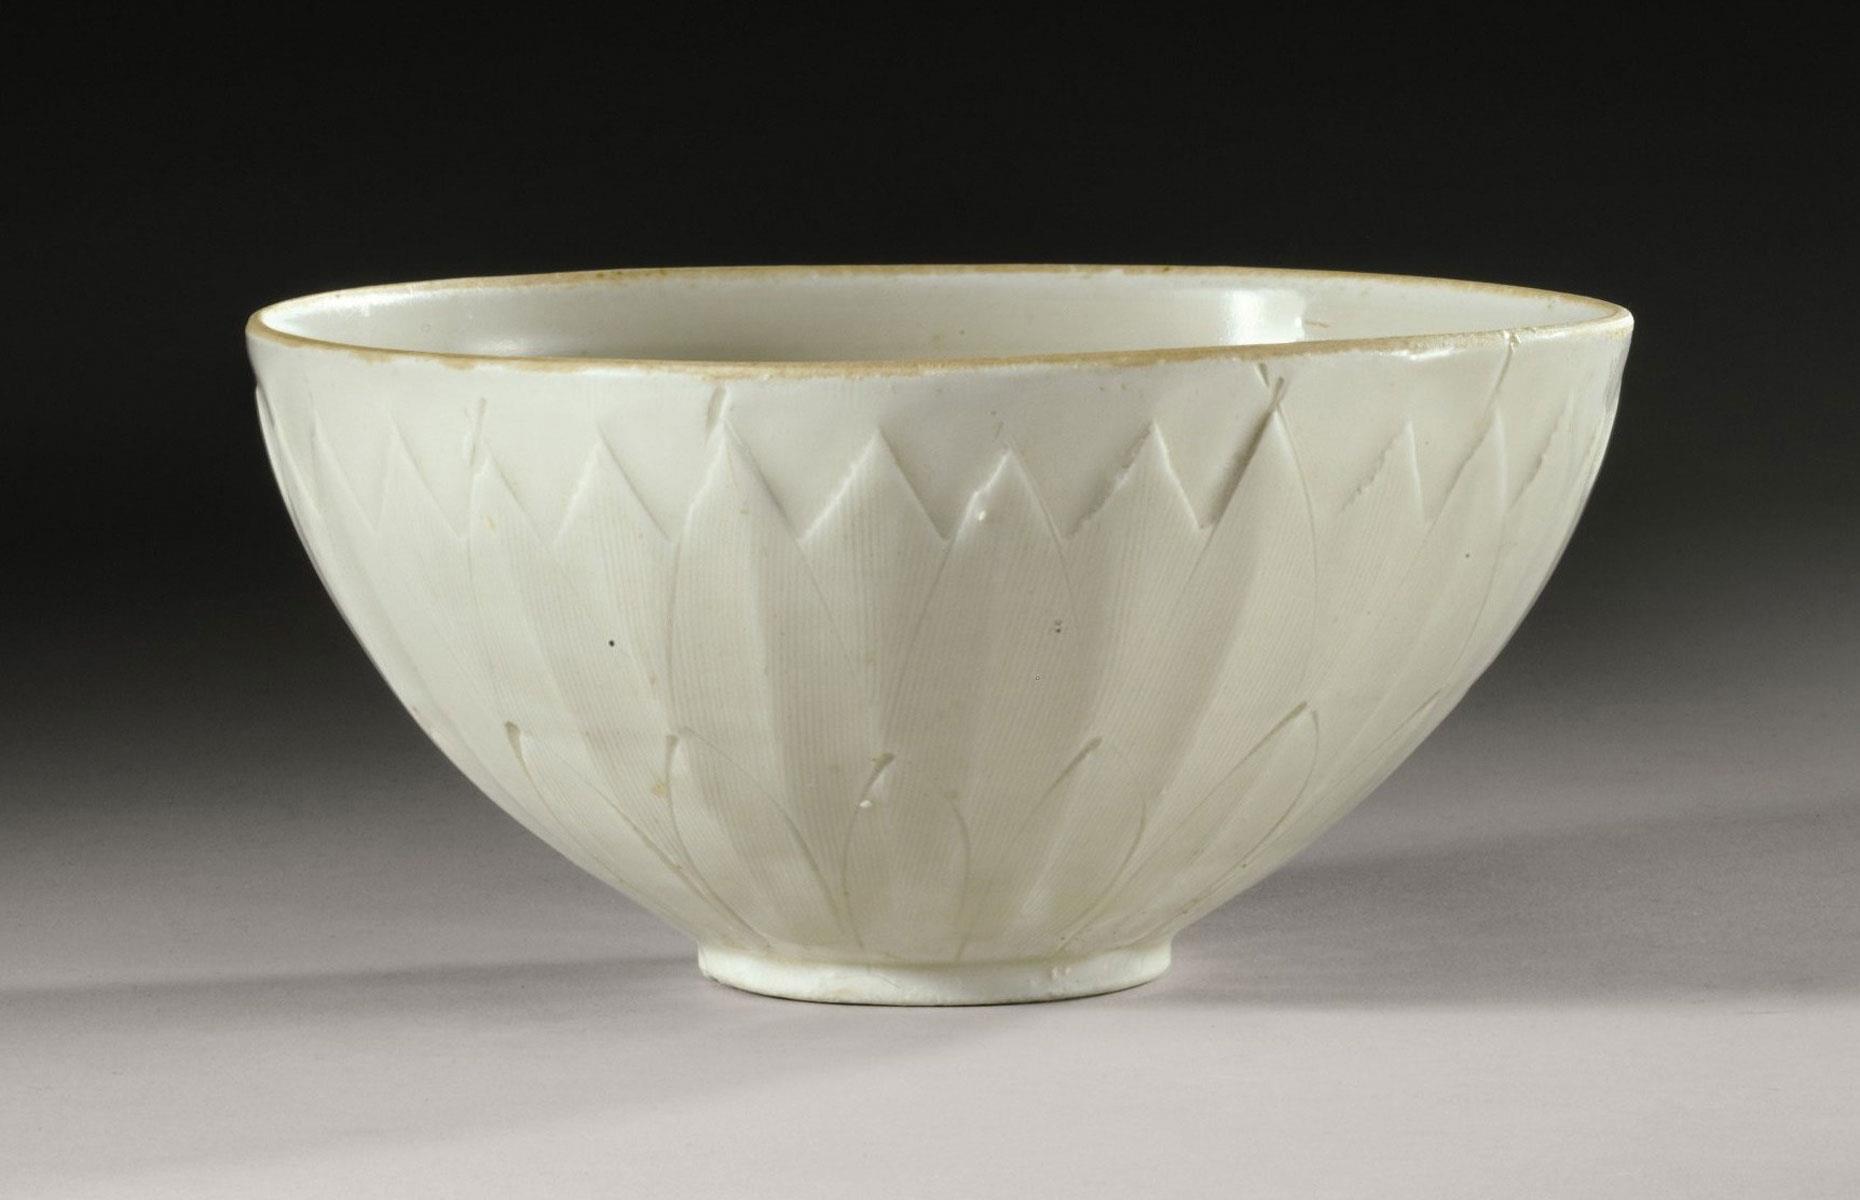 The 1,000-year-old Chinese bowl